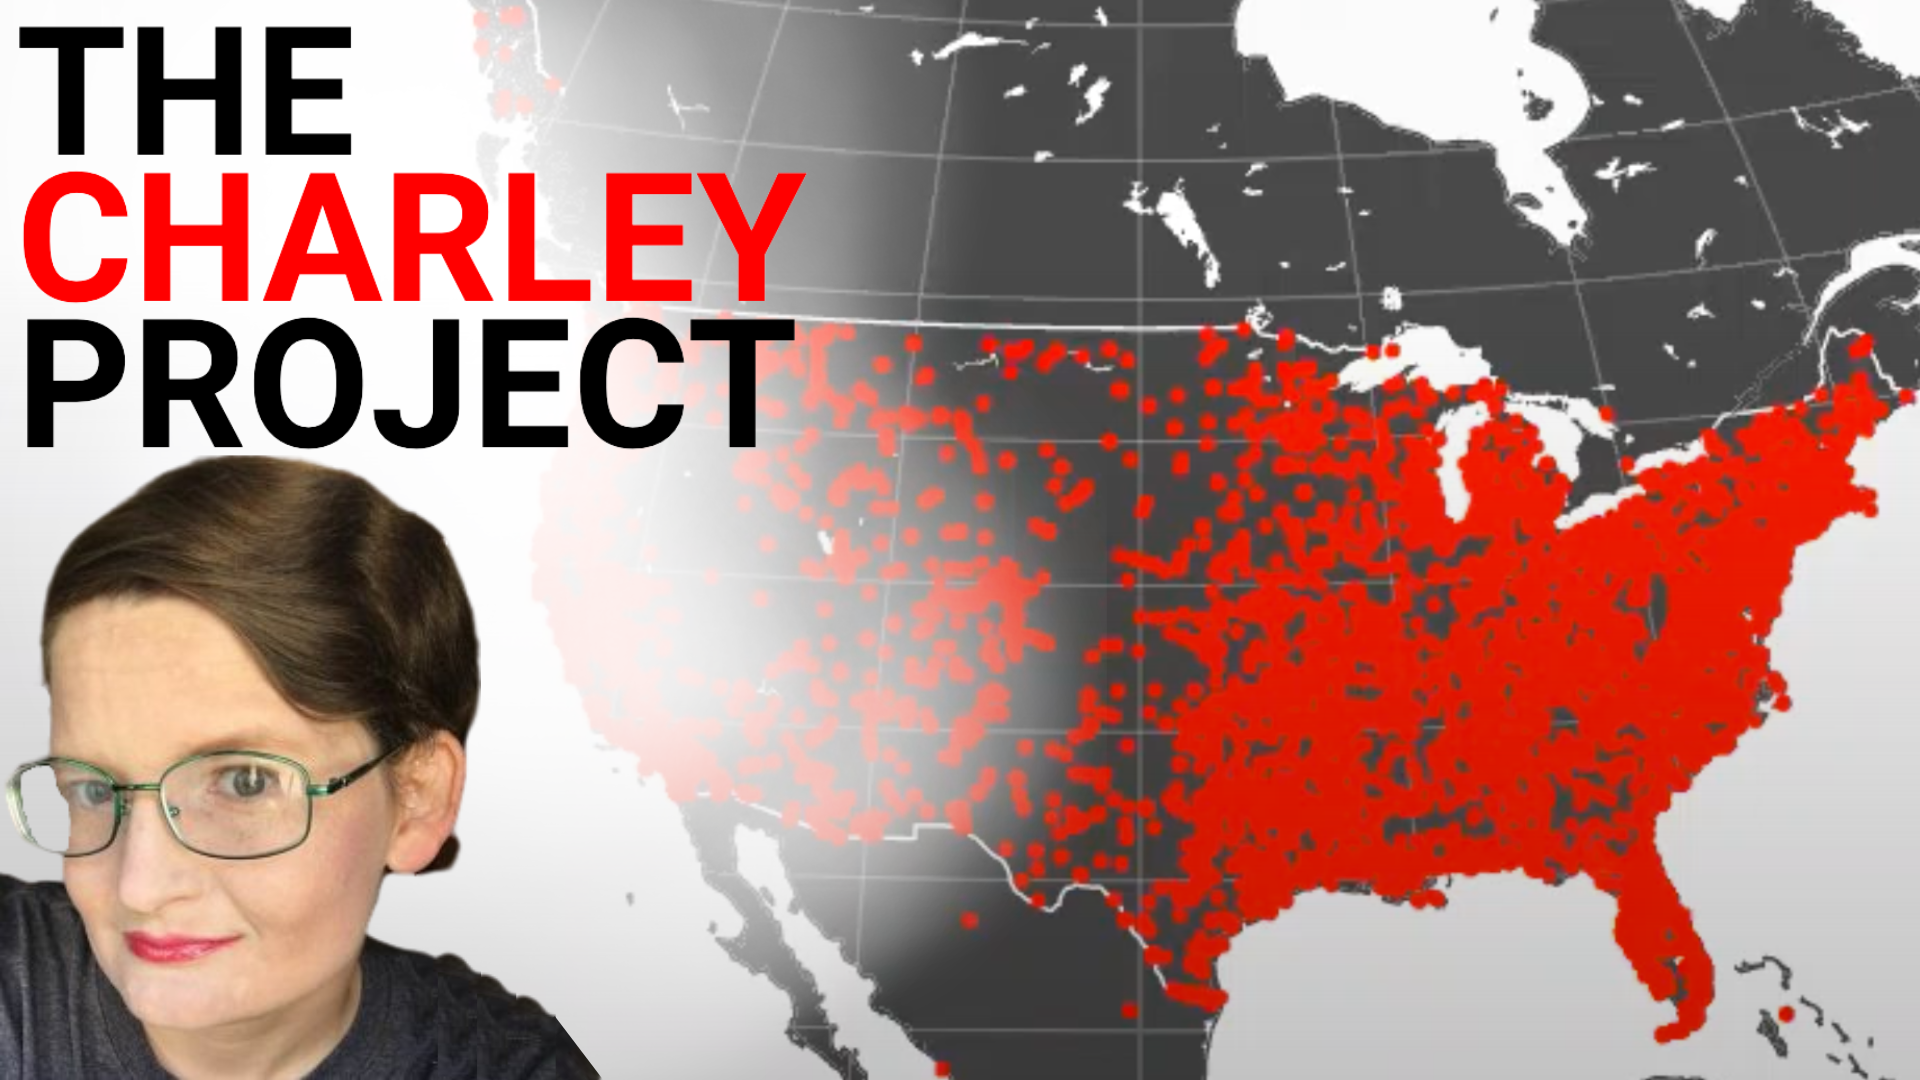 The Charley Project Map and Meaghan Good